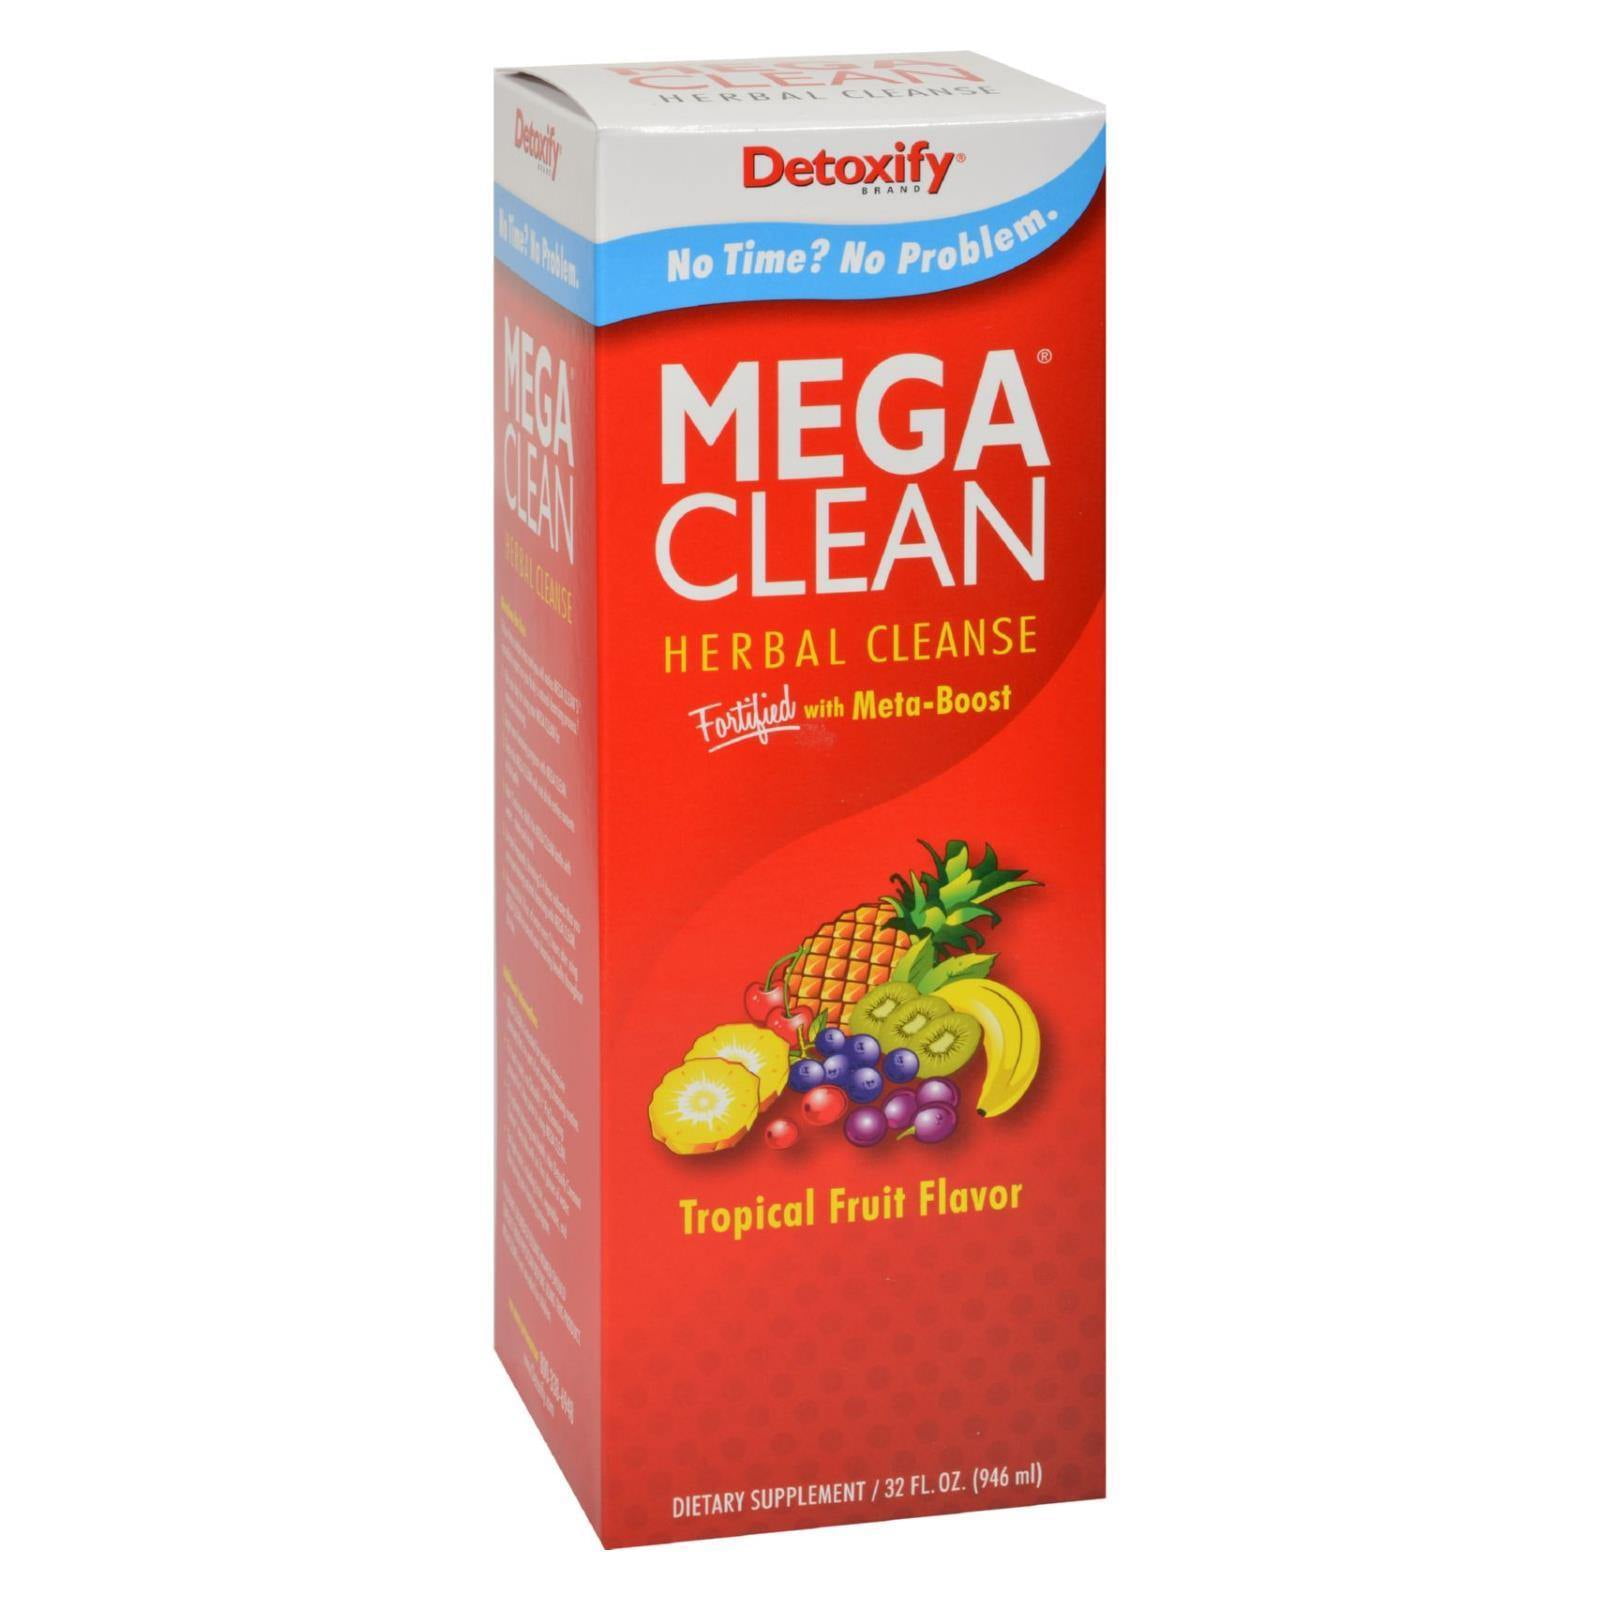 Buy Detoxify Ready Clean Herbal Natural Tropical 16 Fl Oz products at  discounted price - Vitaminocean